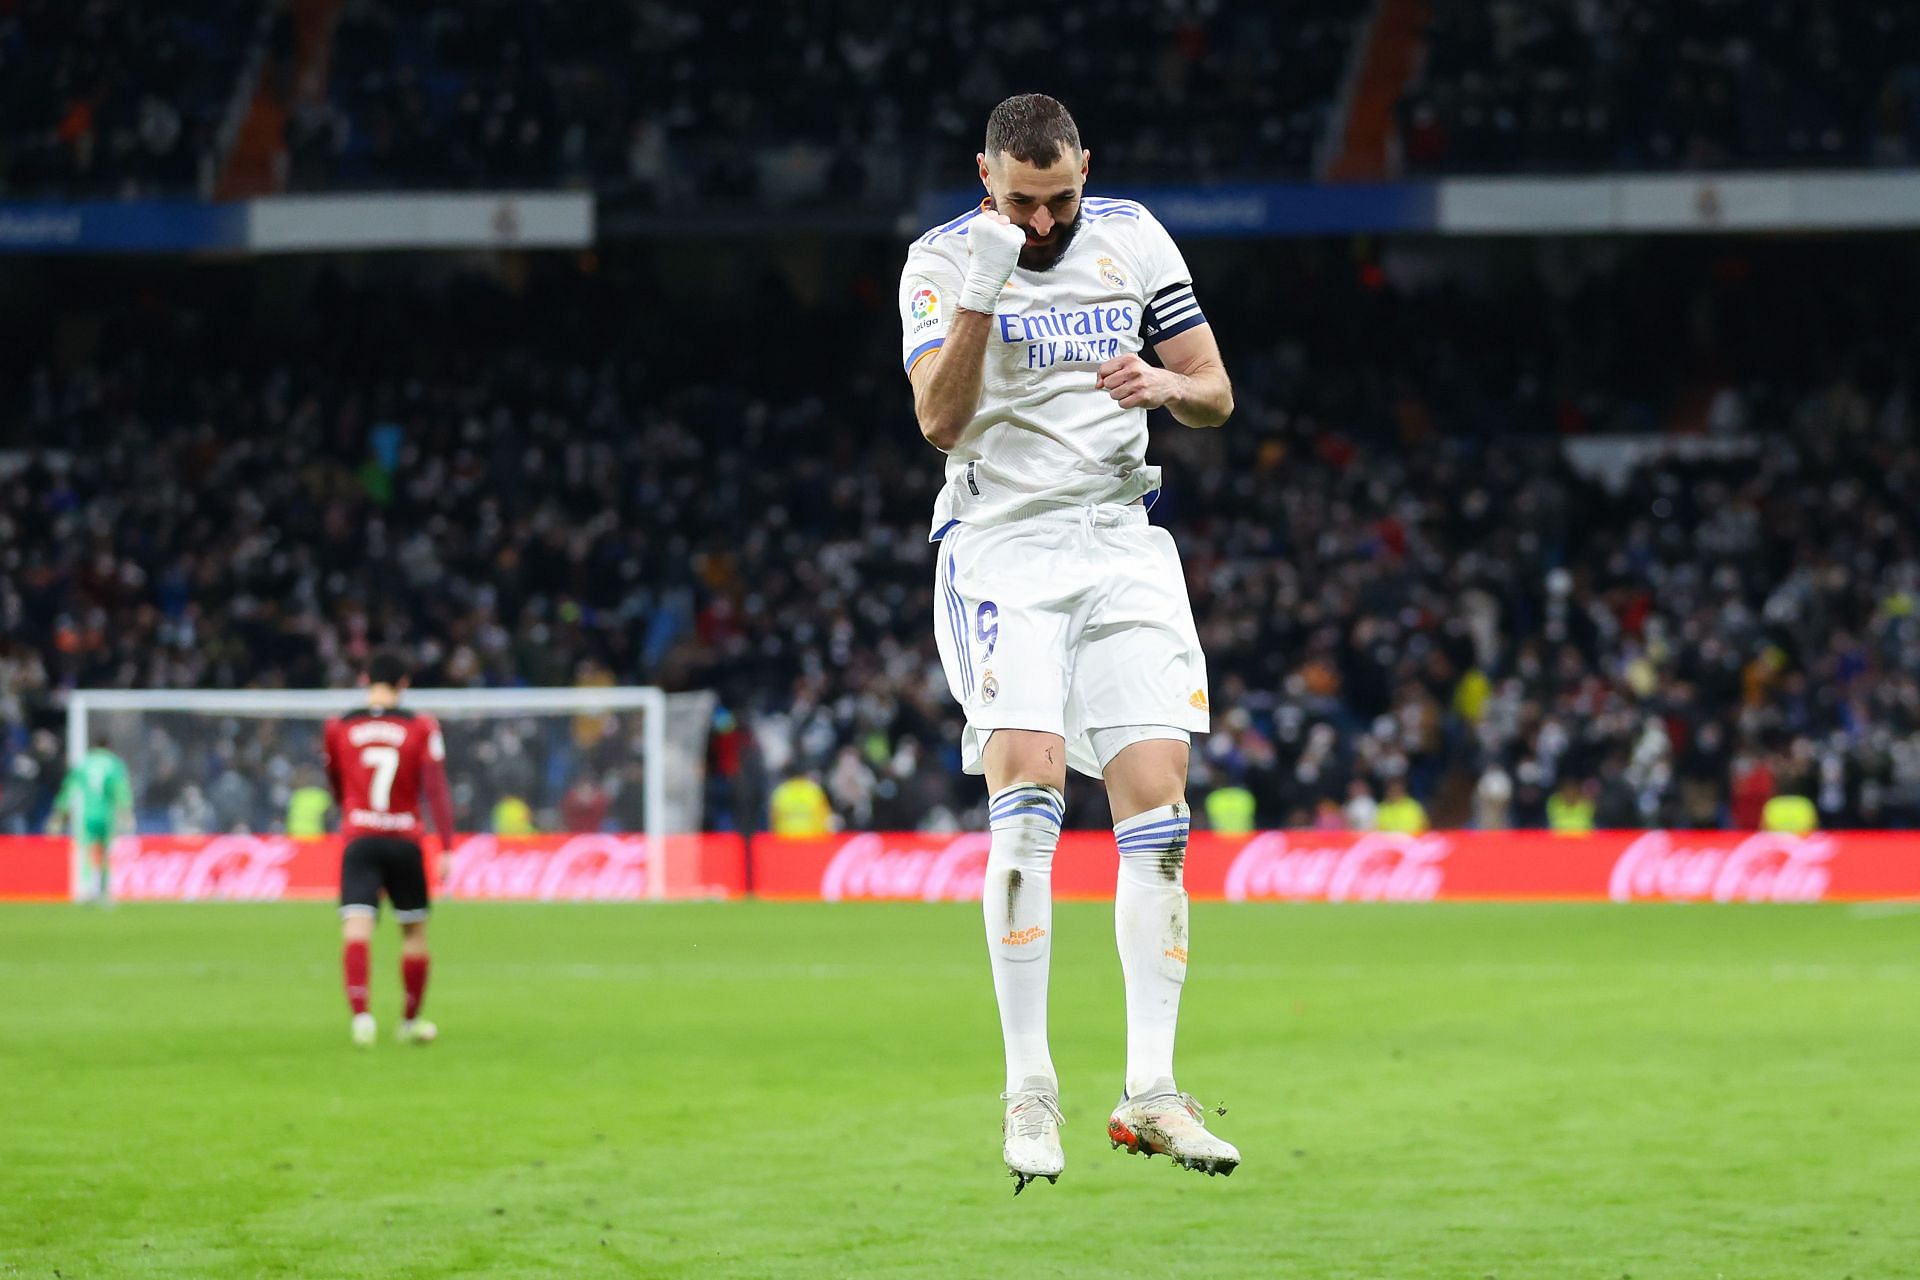 Nabil Djellit believes Real Madrid could be a threat to PSG even without Karim Benzema (in pic).